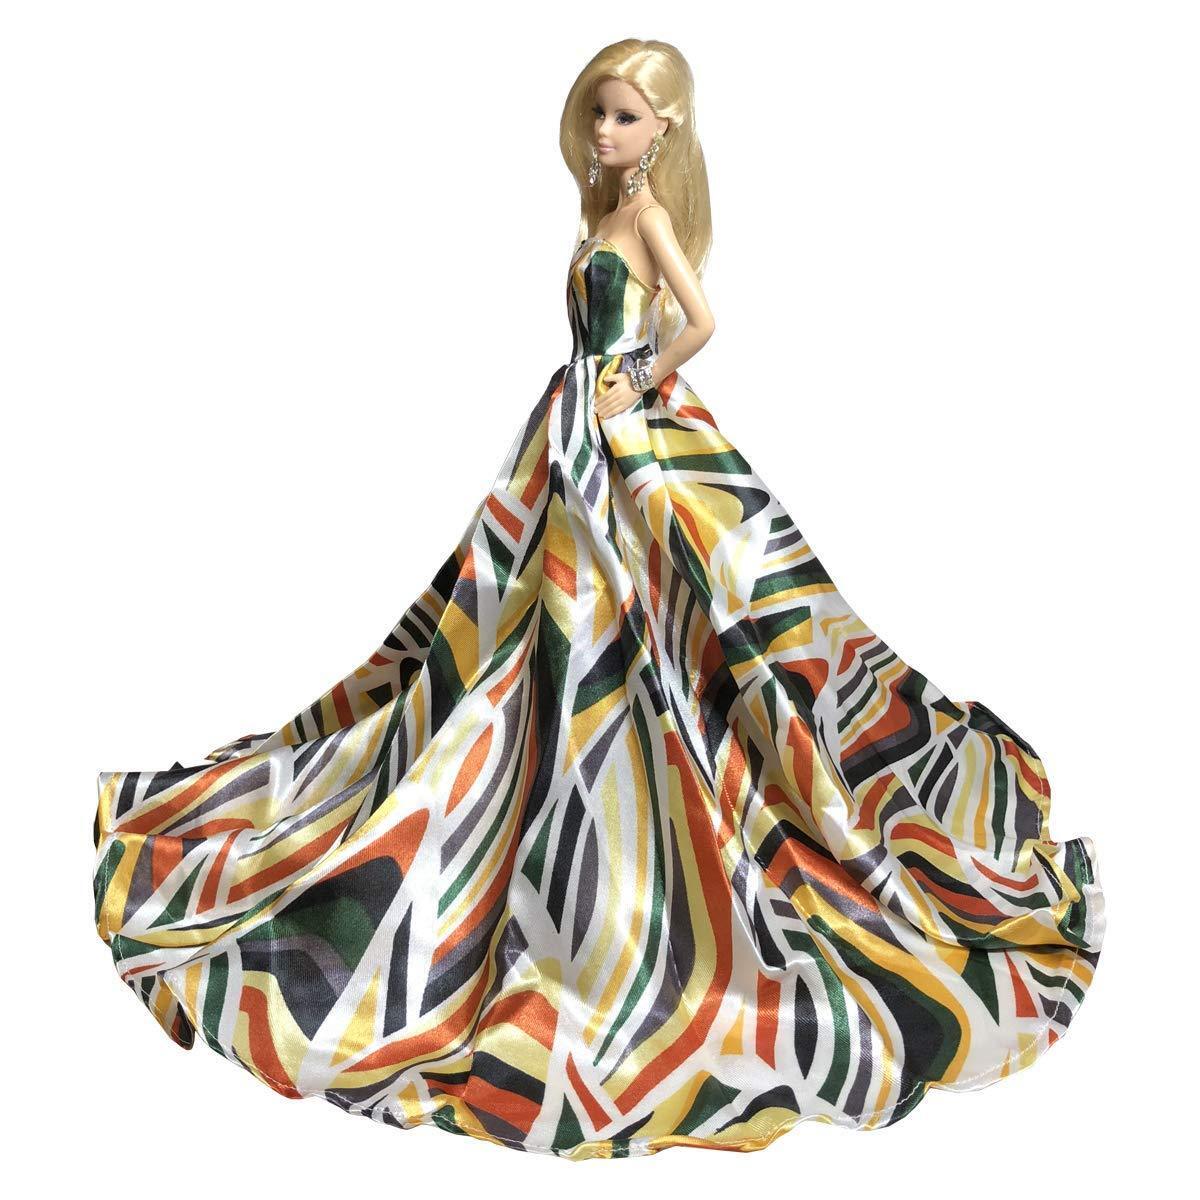 Peregrine Blue Pucci Wave Patterns Large Silk Ball Prom Doll Gown Dress for 11.5 inches Dolls